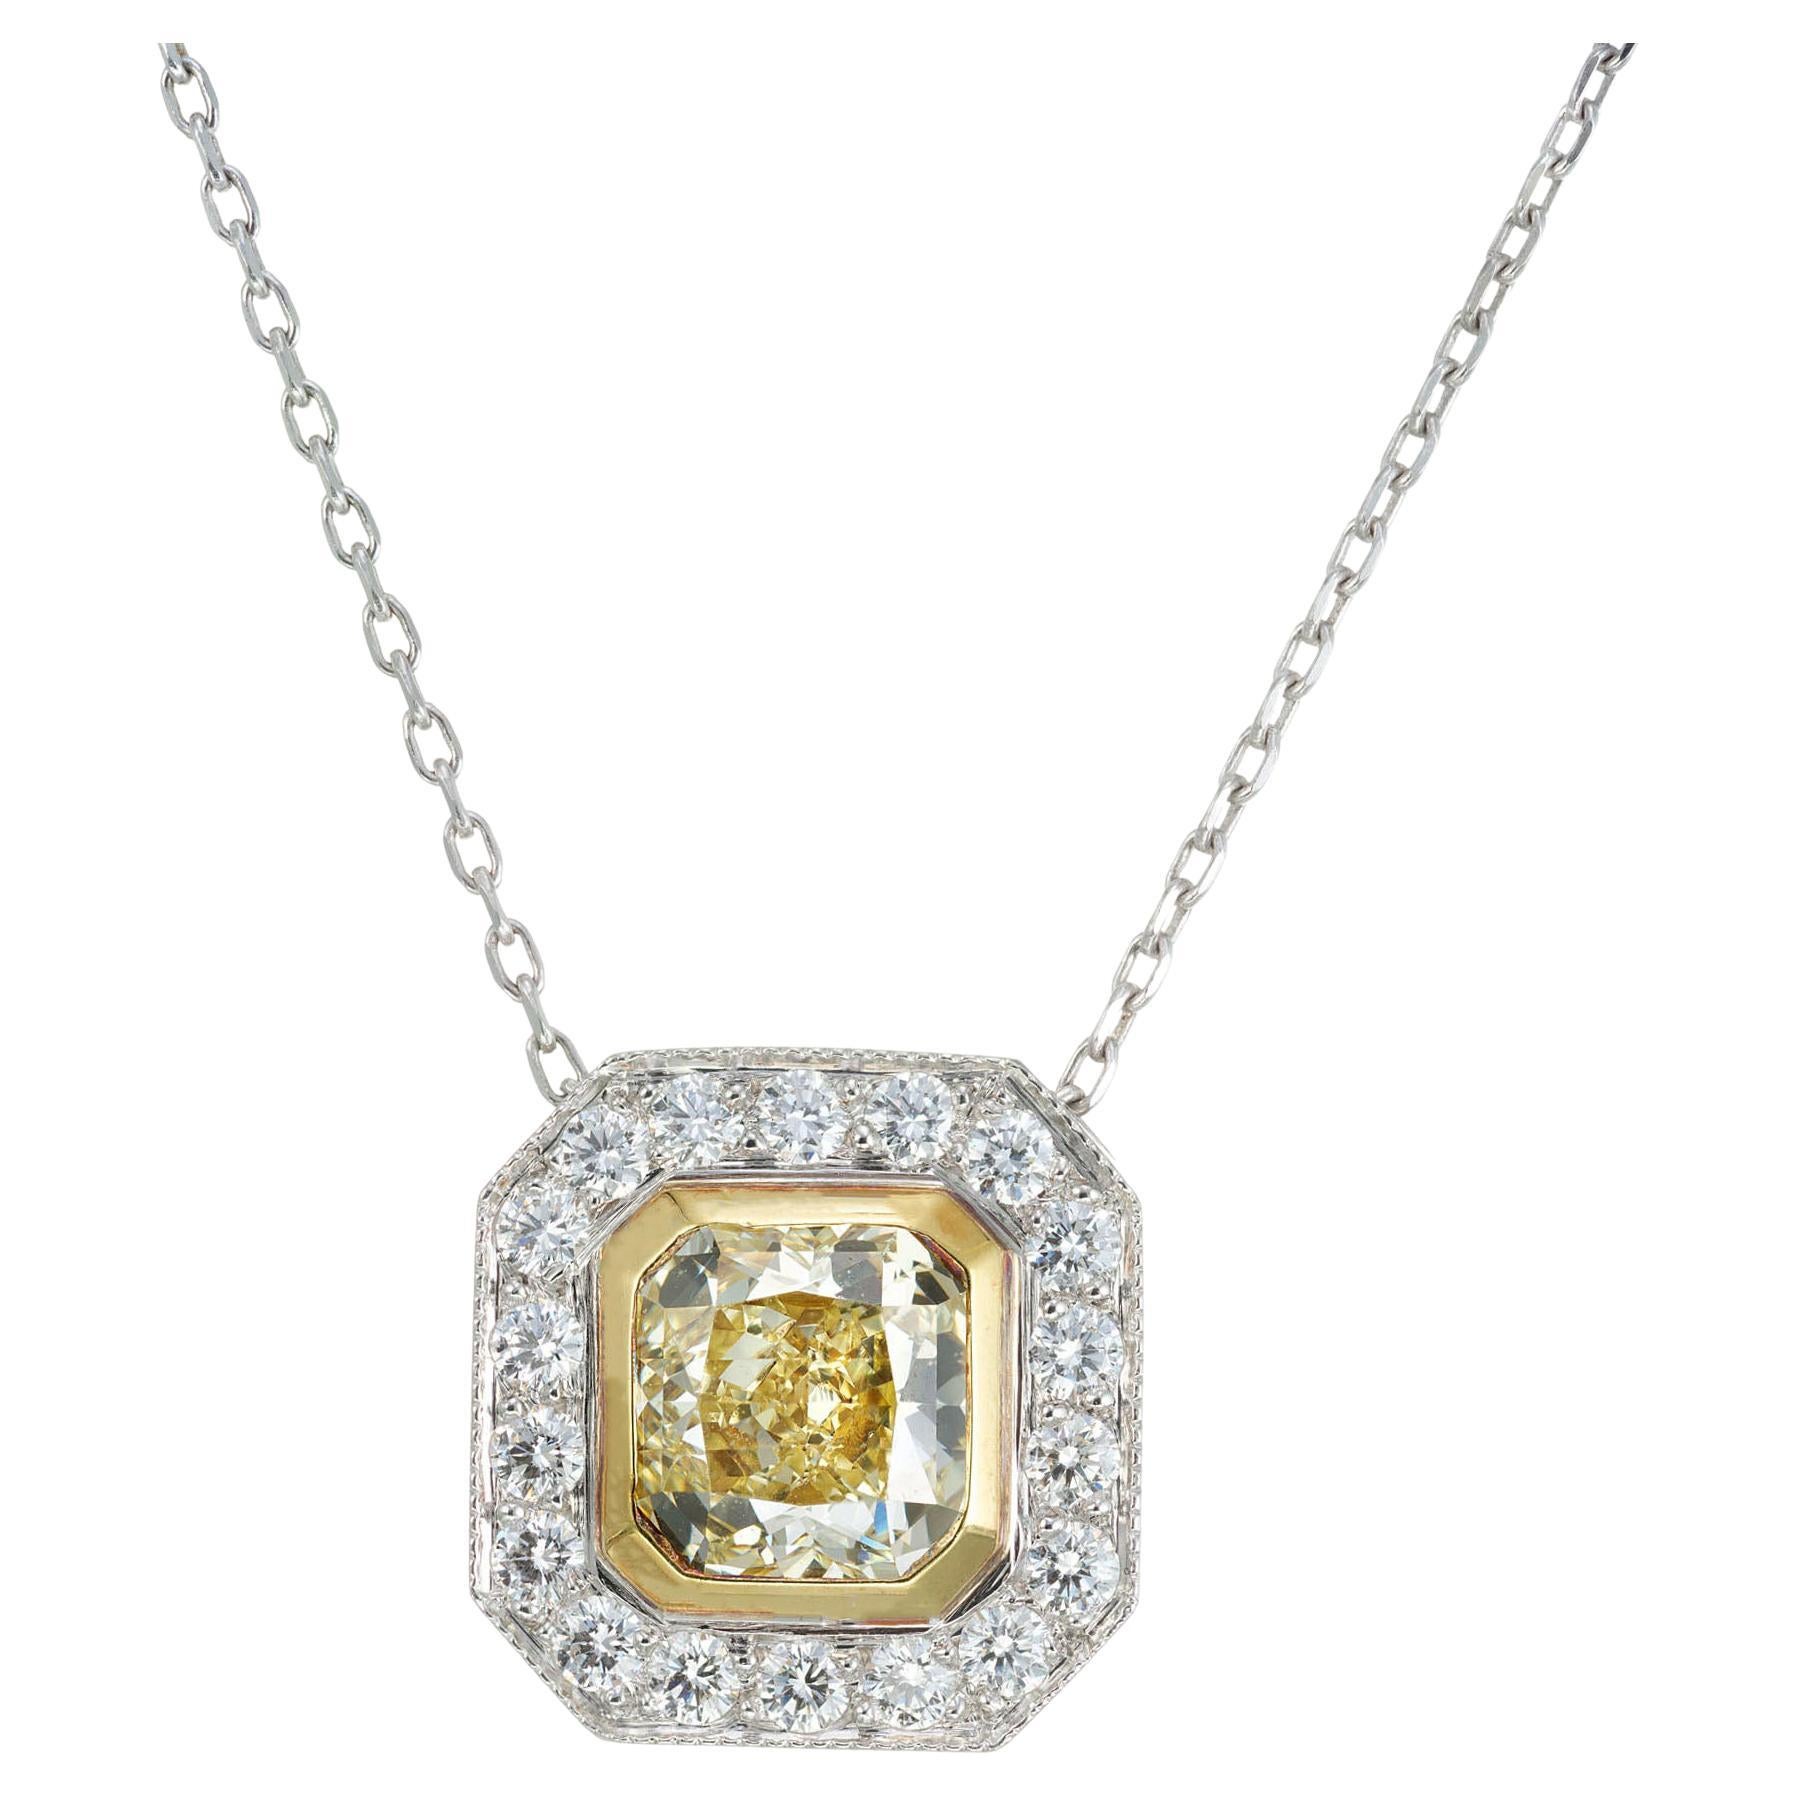 Peter Suchy 1.50 Carat Canary Yellow Diamond Gold Platinum Pendant Necklace For Sale